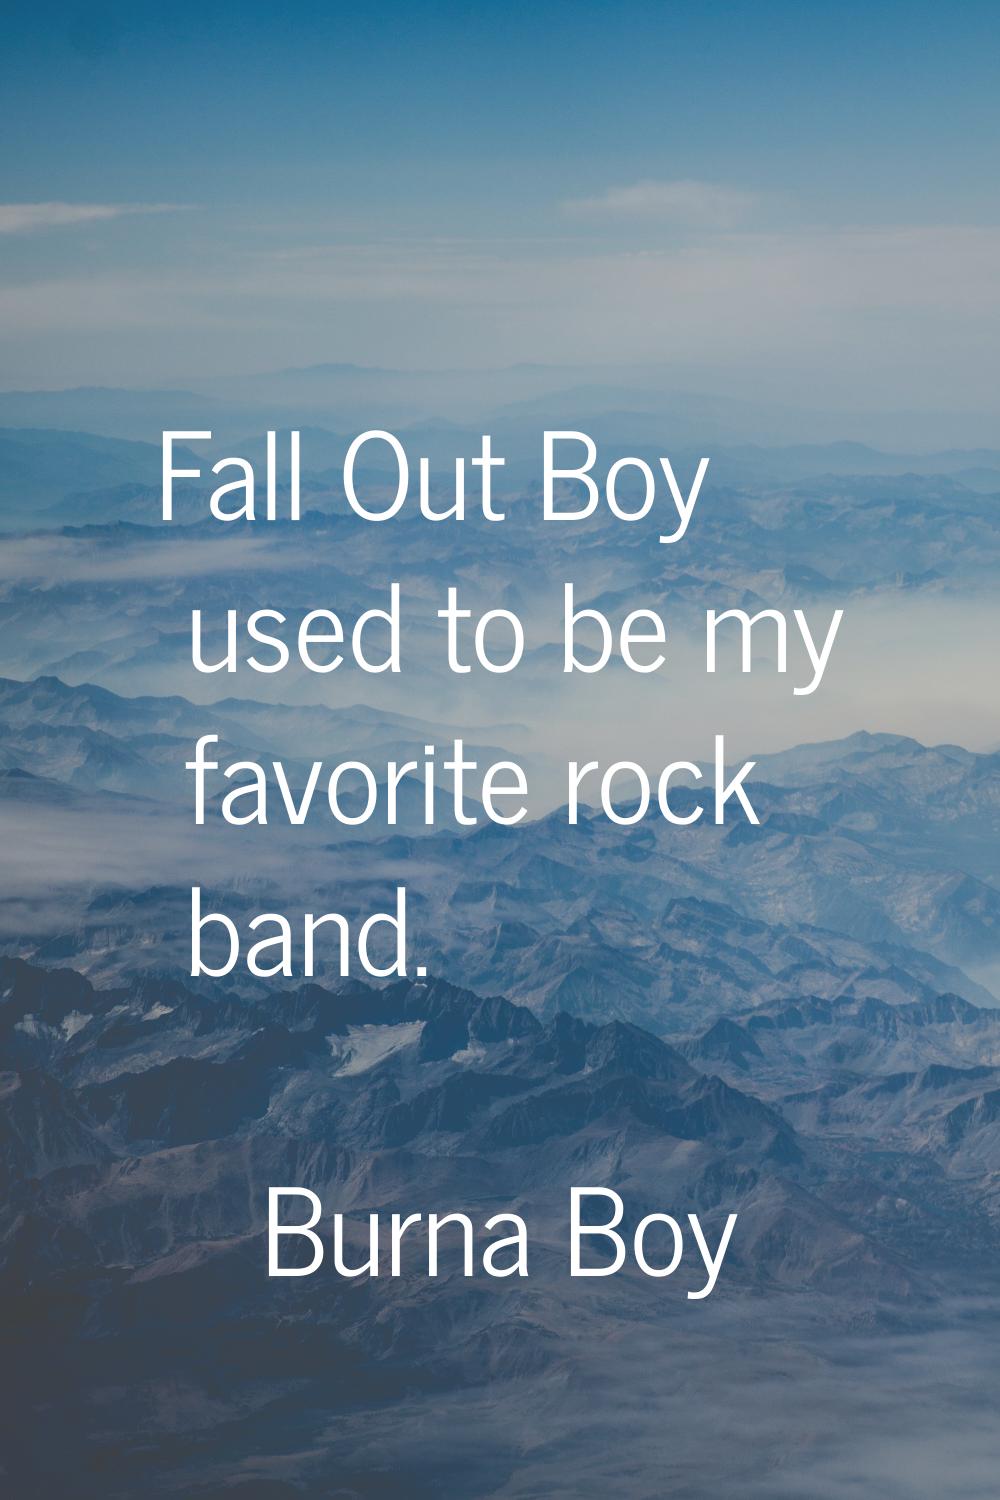 Fall Out Boy used to be my favorite rock band.